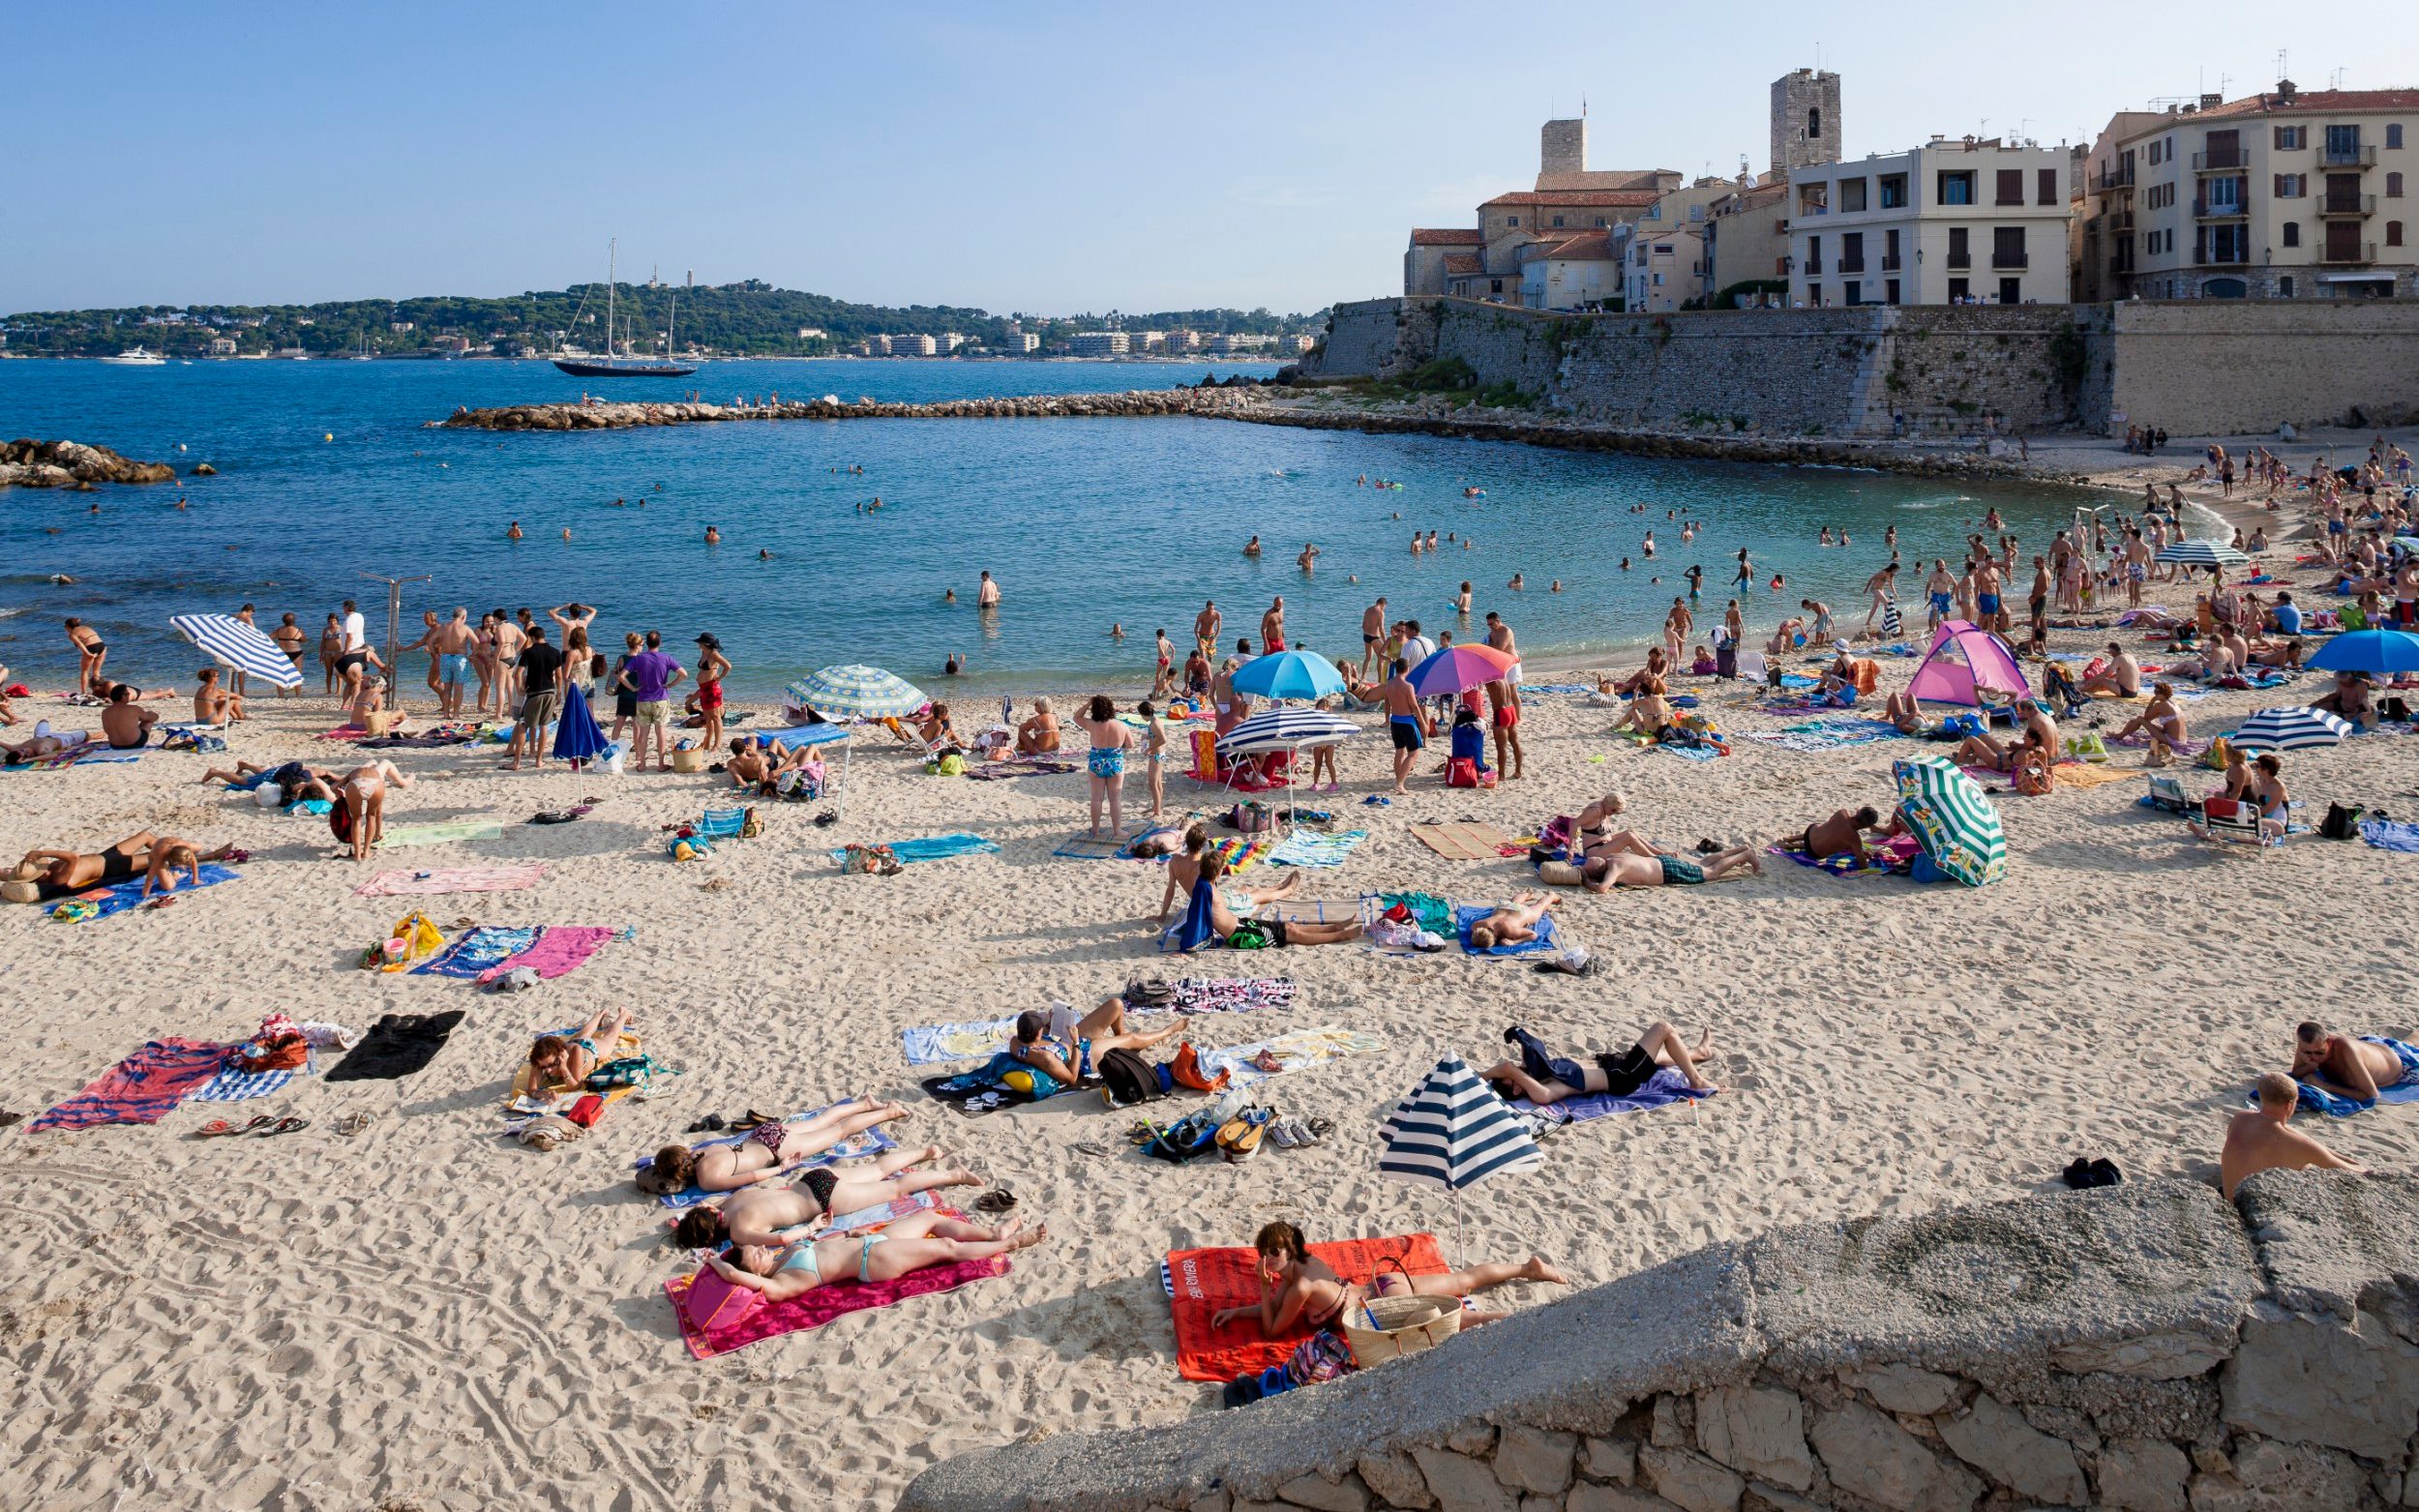 europe’s most polluted beaches – where swimming comes with a health warning